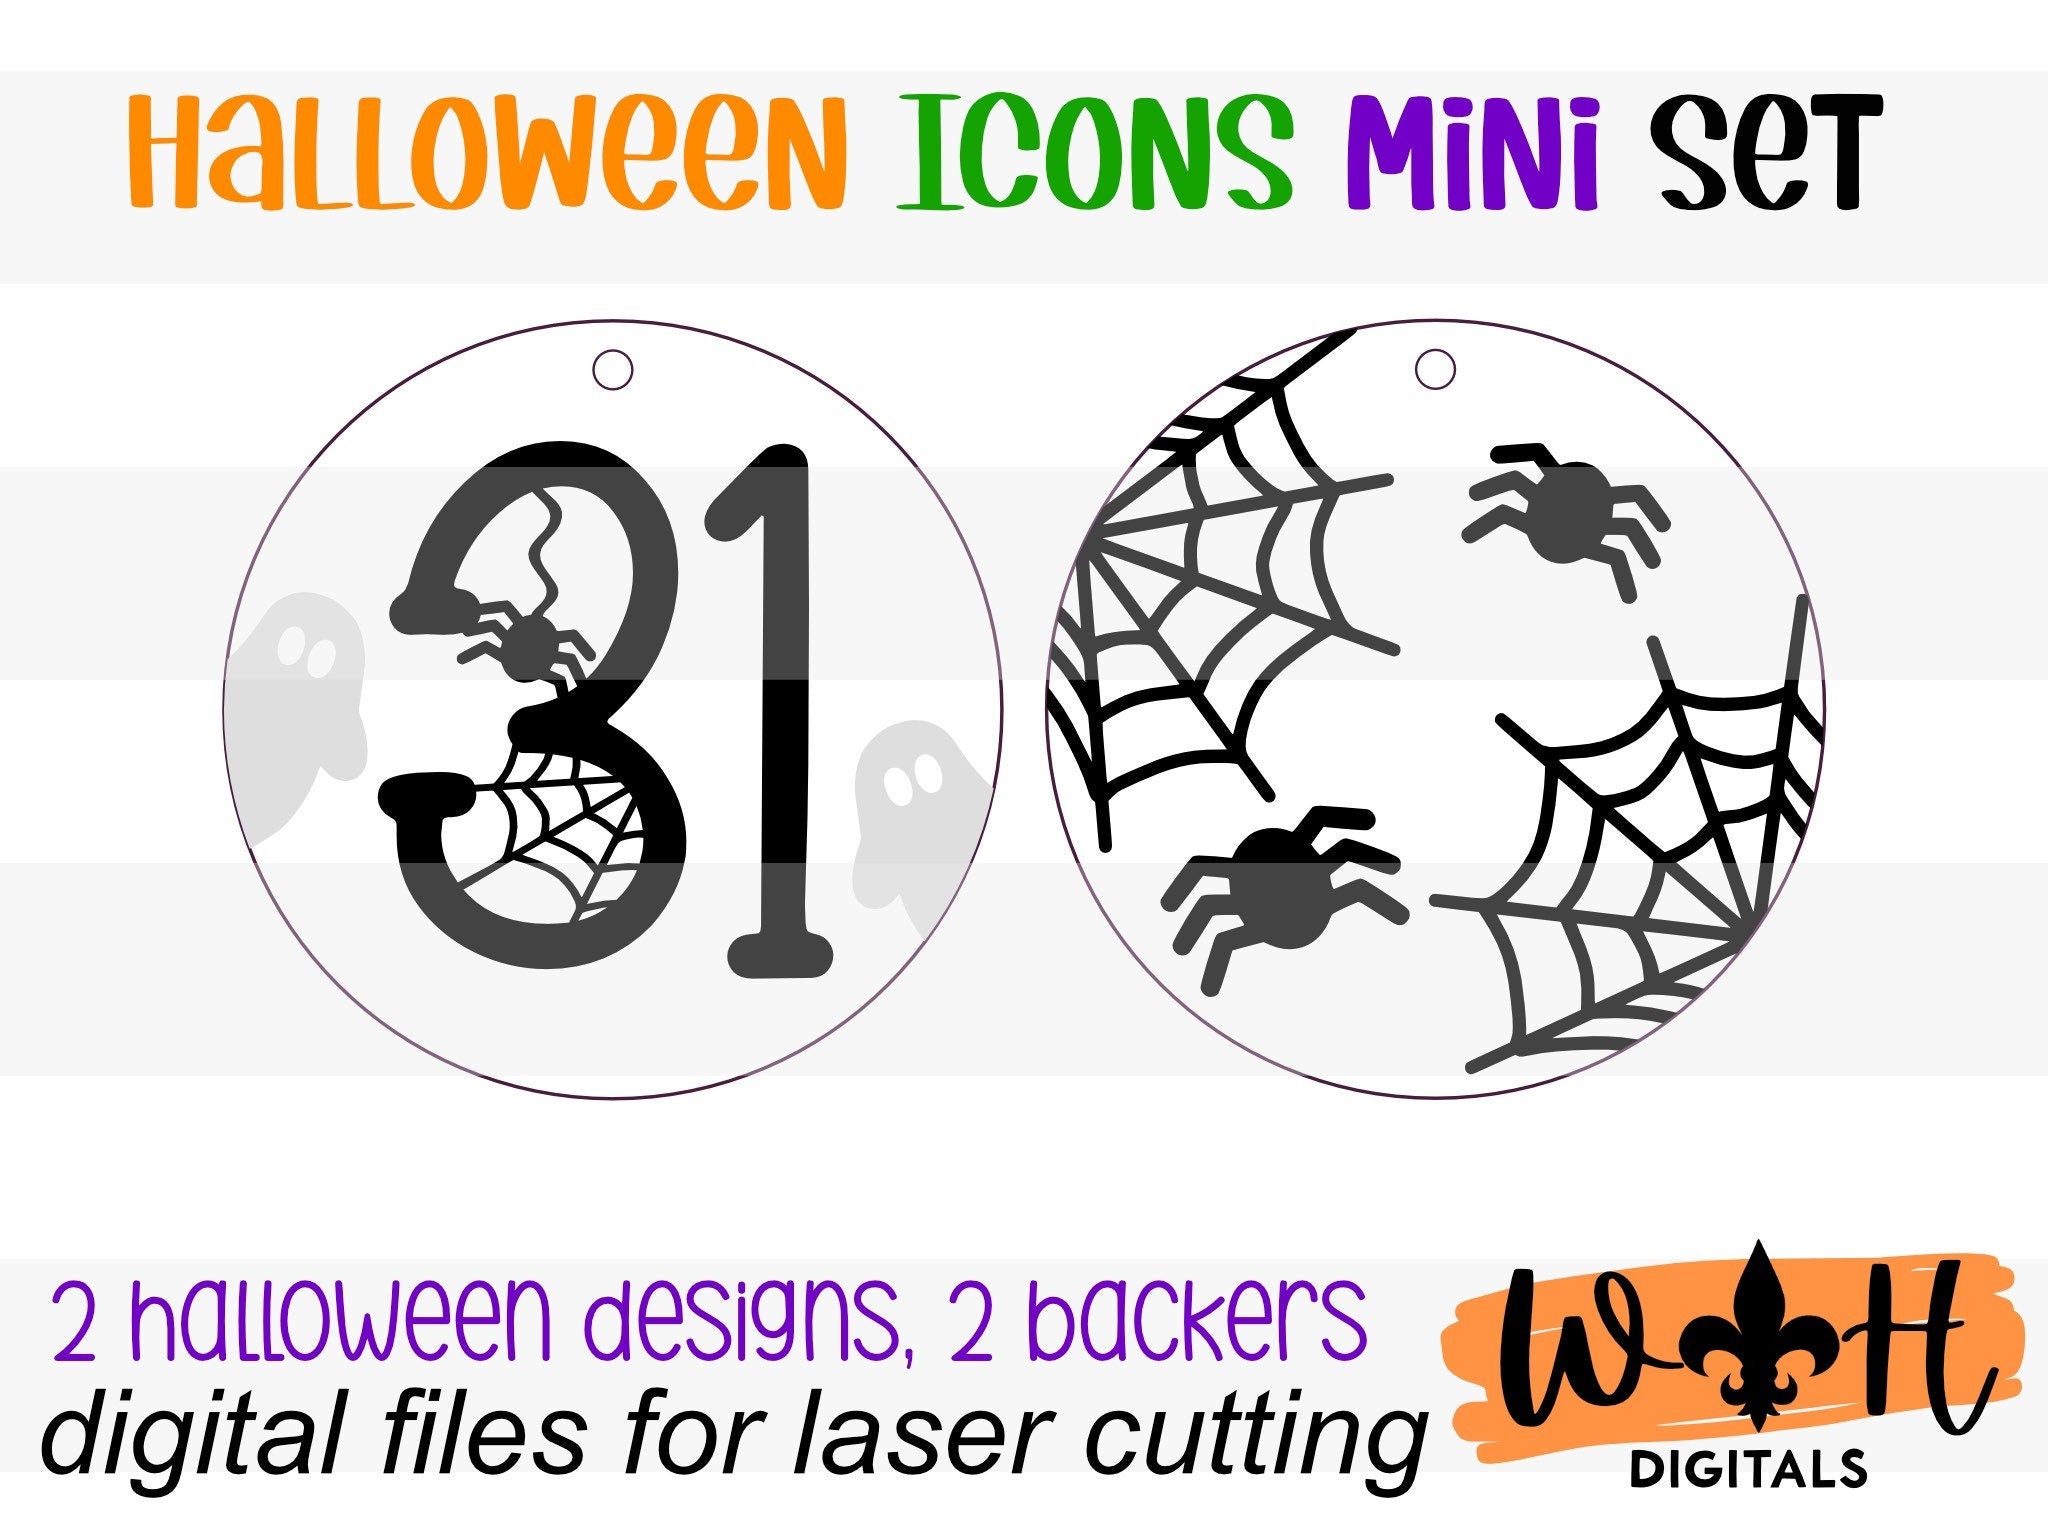 DIGITAL FILE - Halloween Icons - 31 and Cobwebs - Shiplap Style Doodle Ornaments - SVG Cut File For Glowforge - Cut Files For Lasers